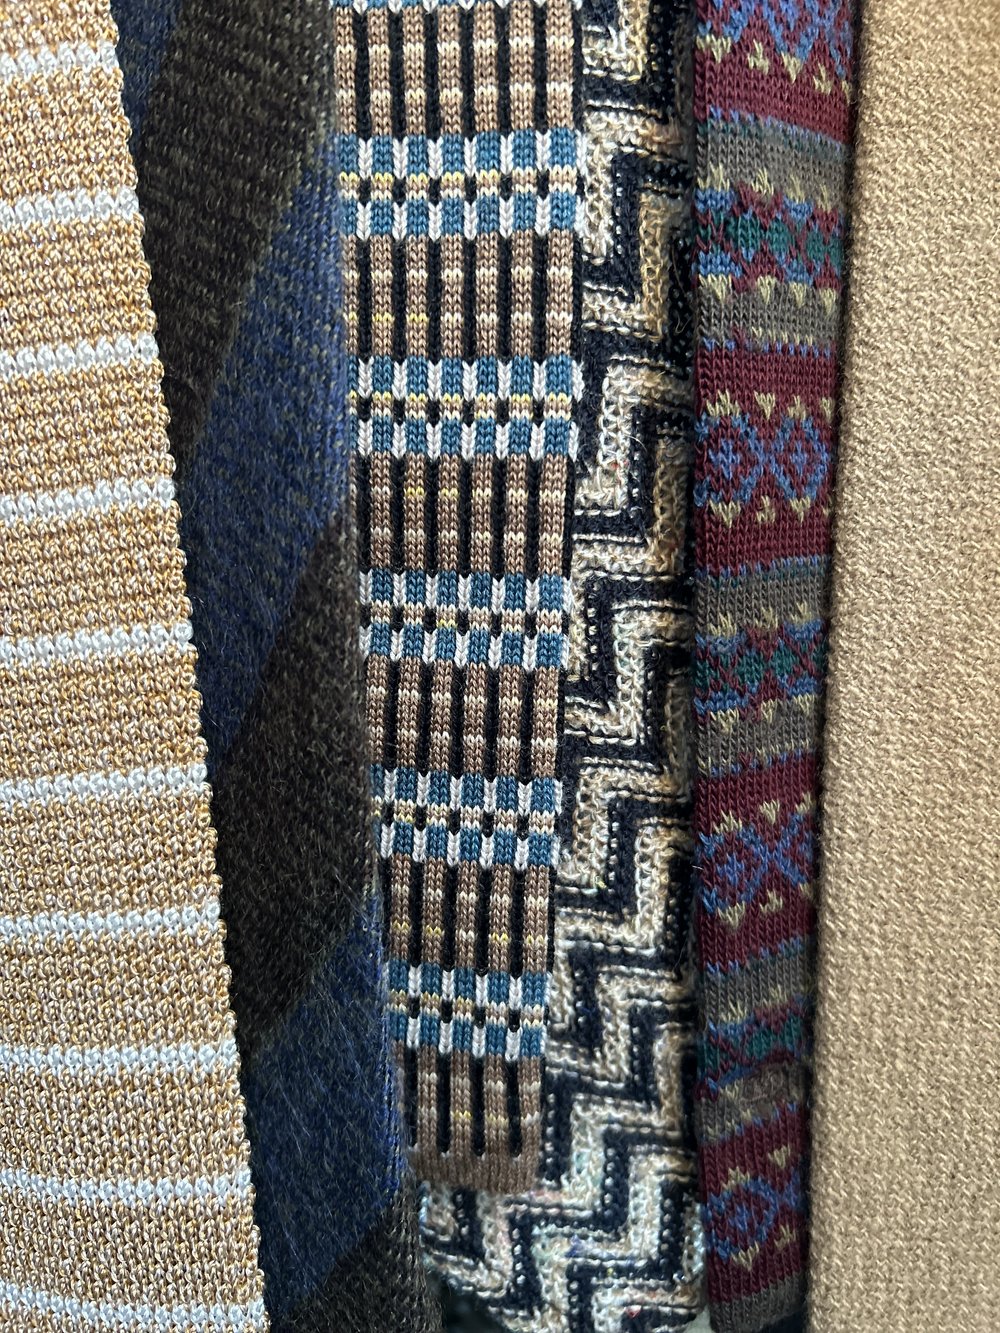 Knit Ties from Peter Kuklinski's Collection